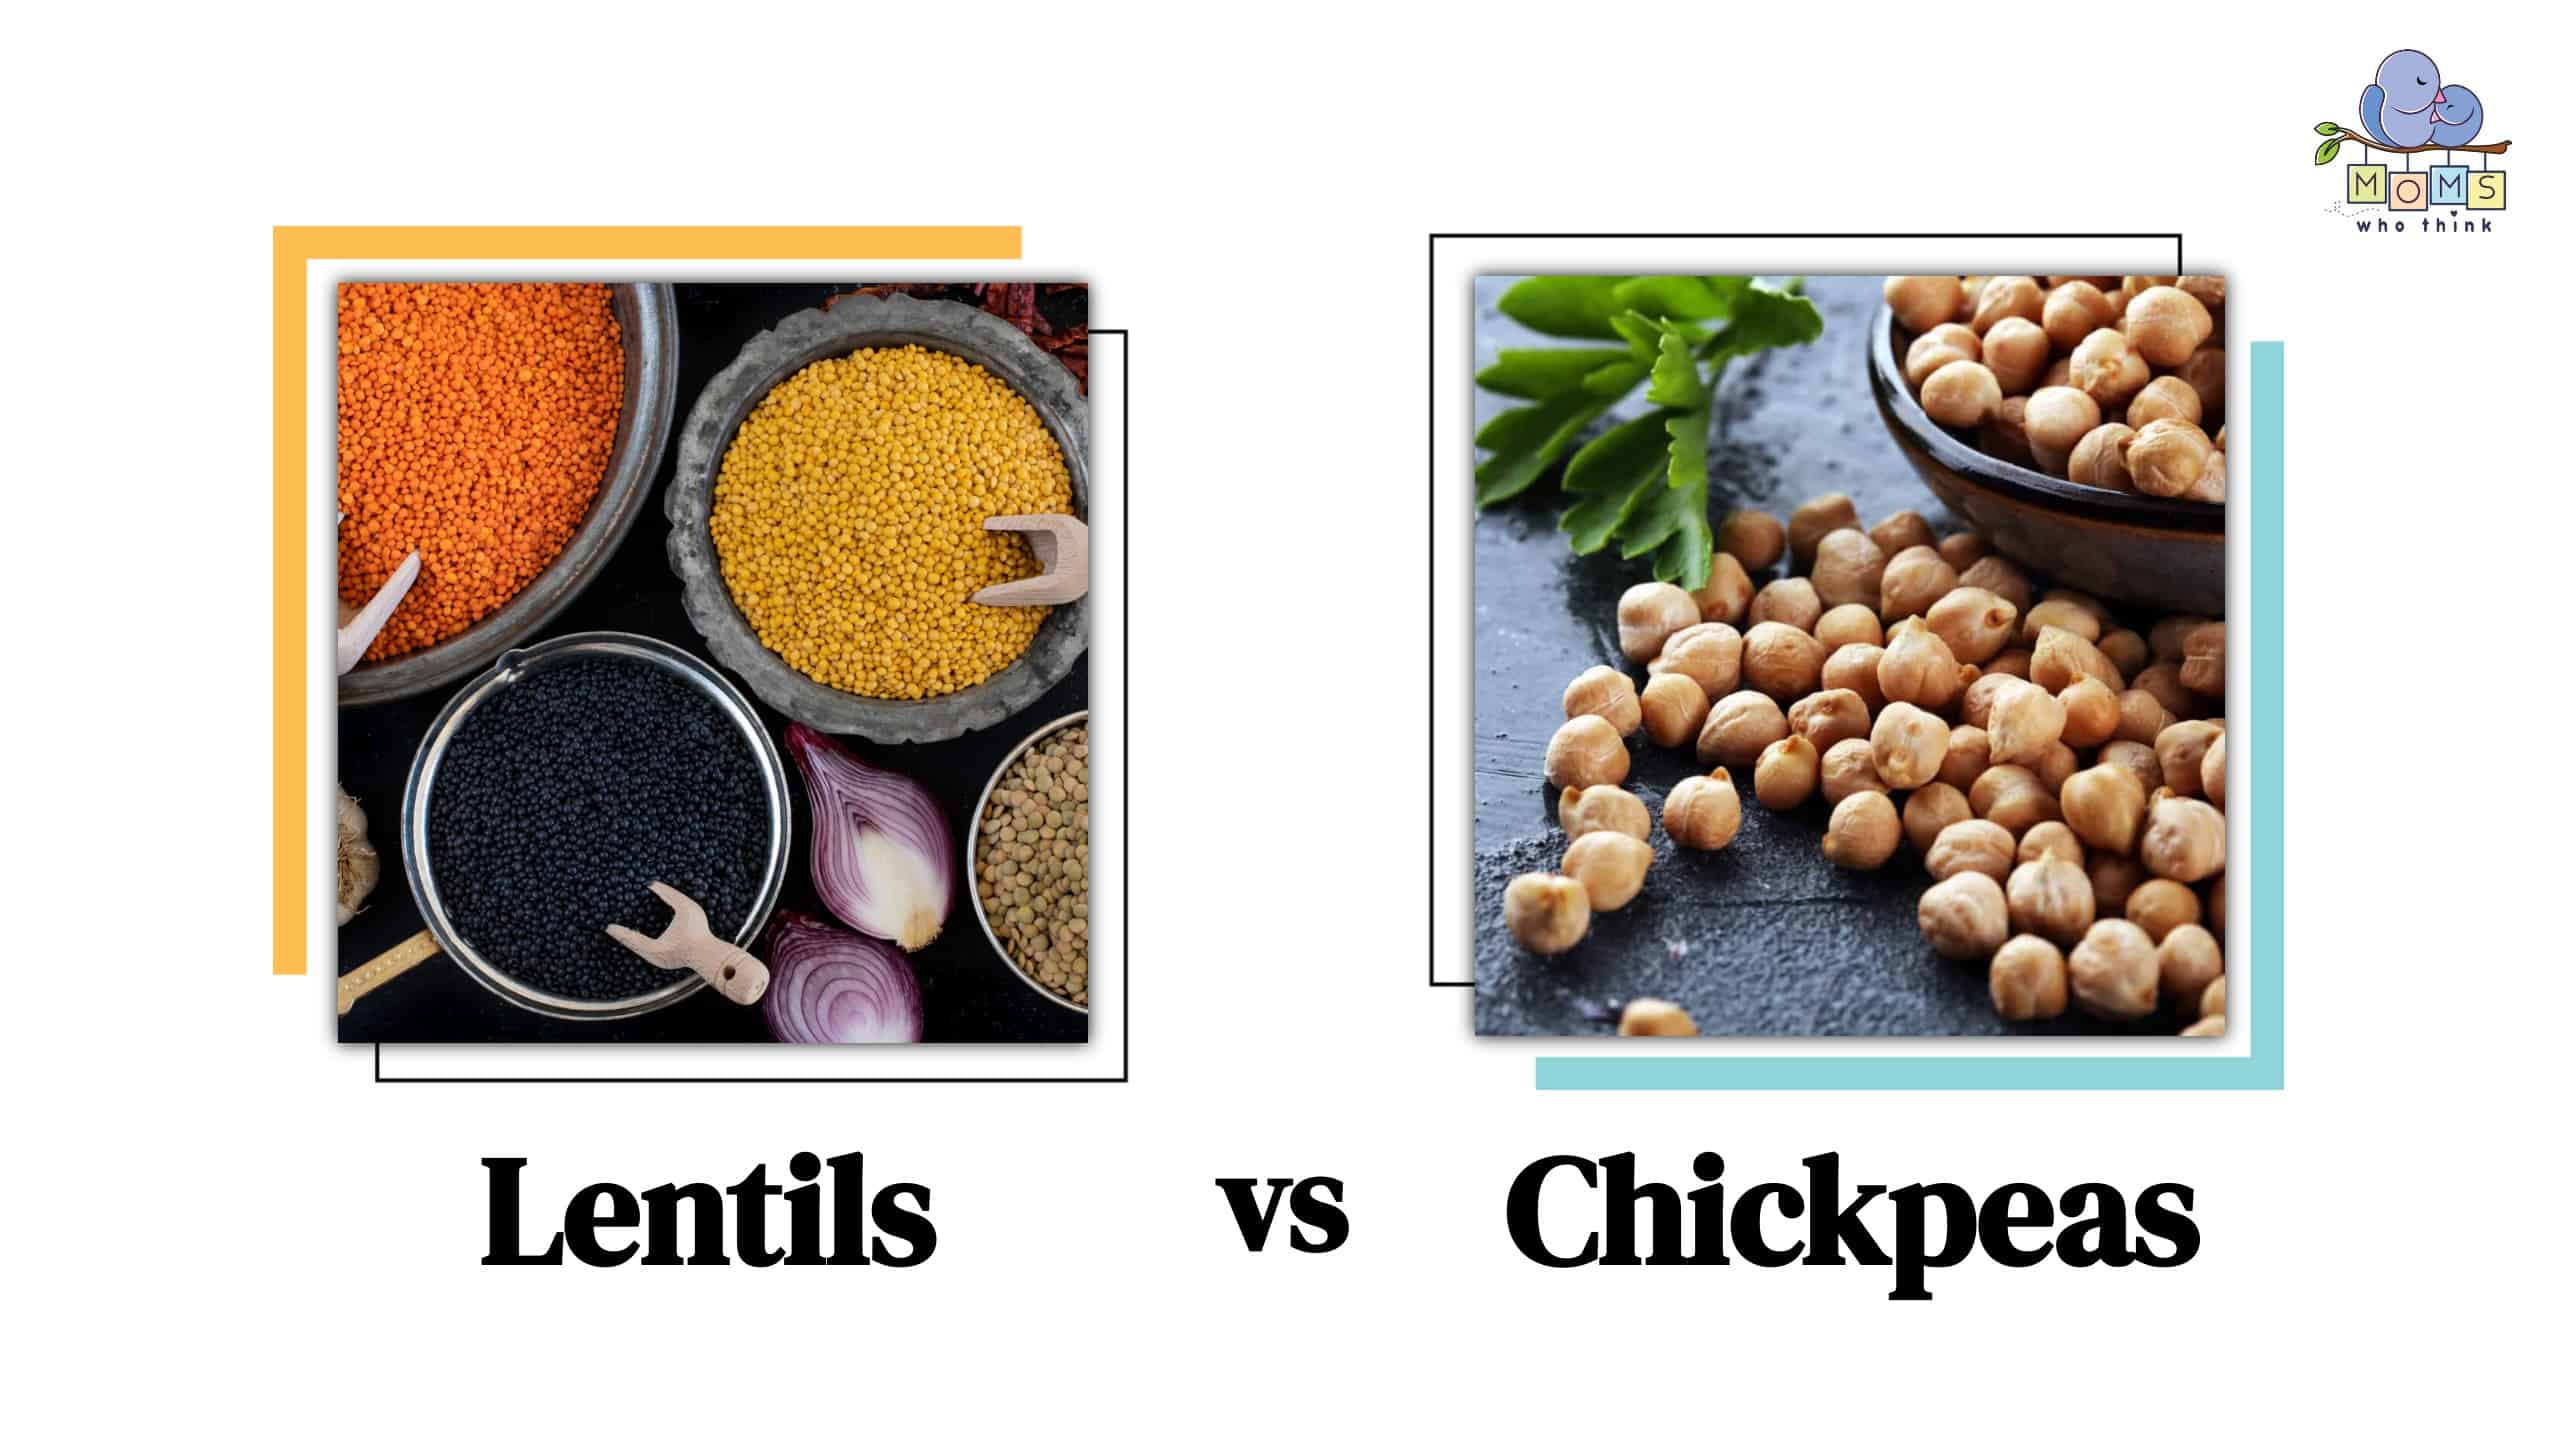 Lentils vs Chickpeas: What's the Difference?